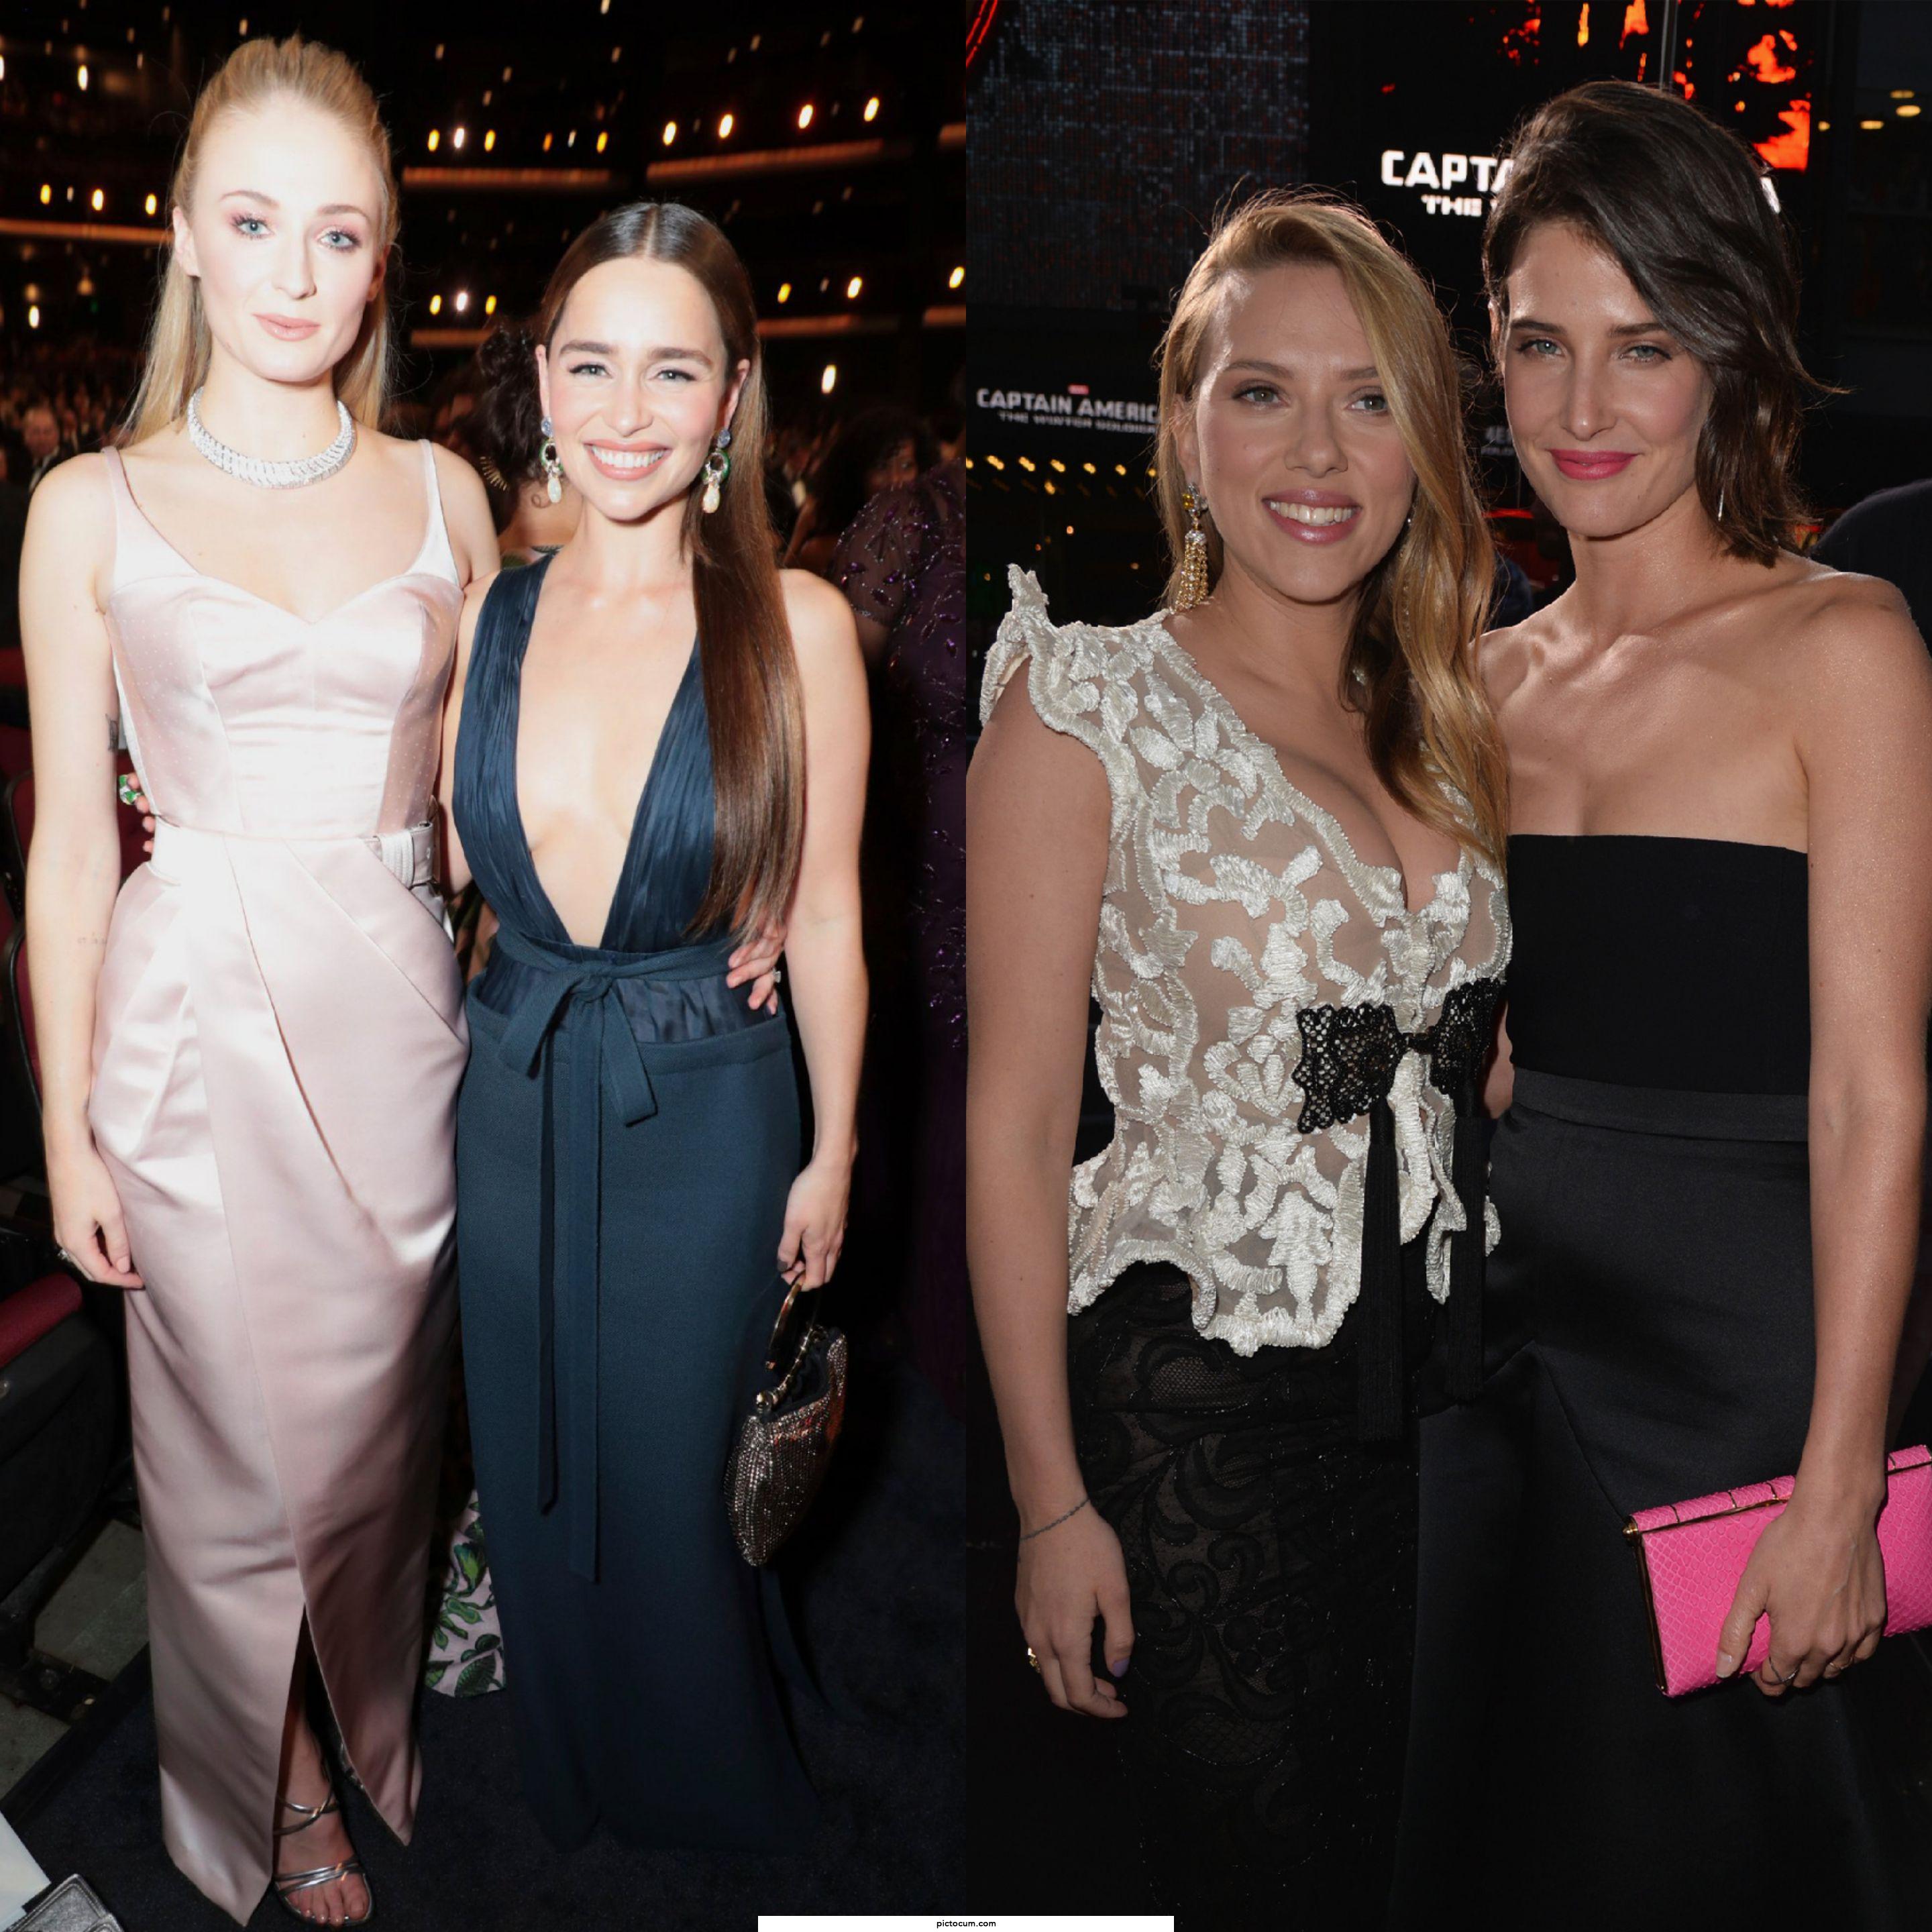 would you rather a GoT threesome with Sophie and Emilia or an MCU threesome with Scarlett and Cobie?